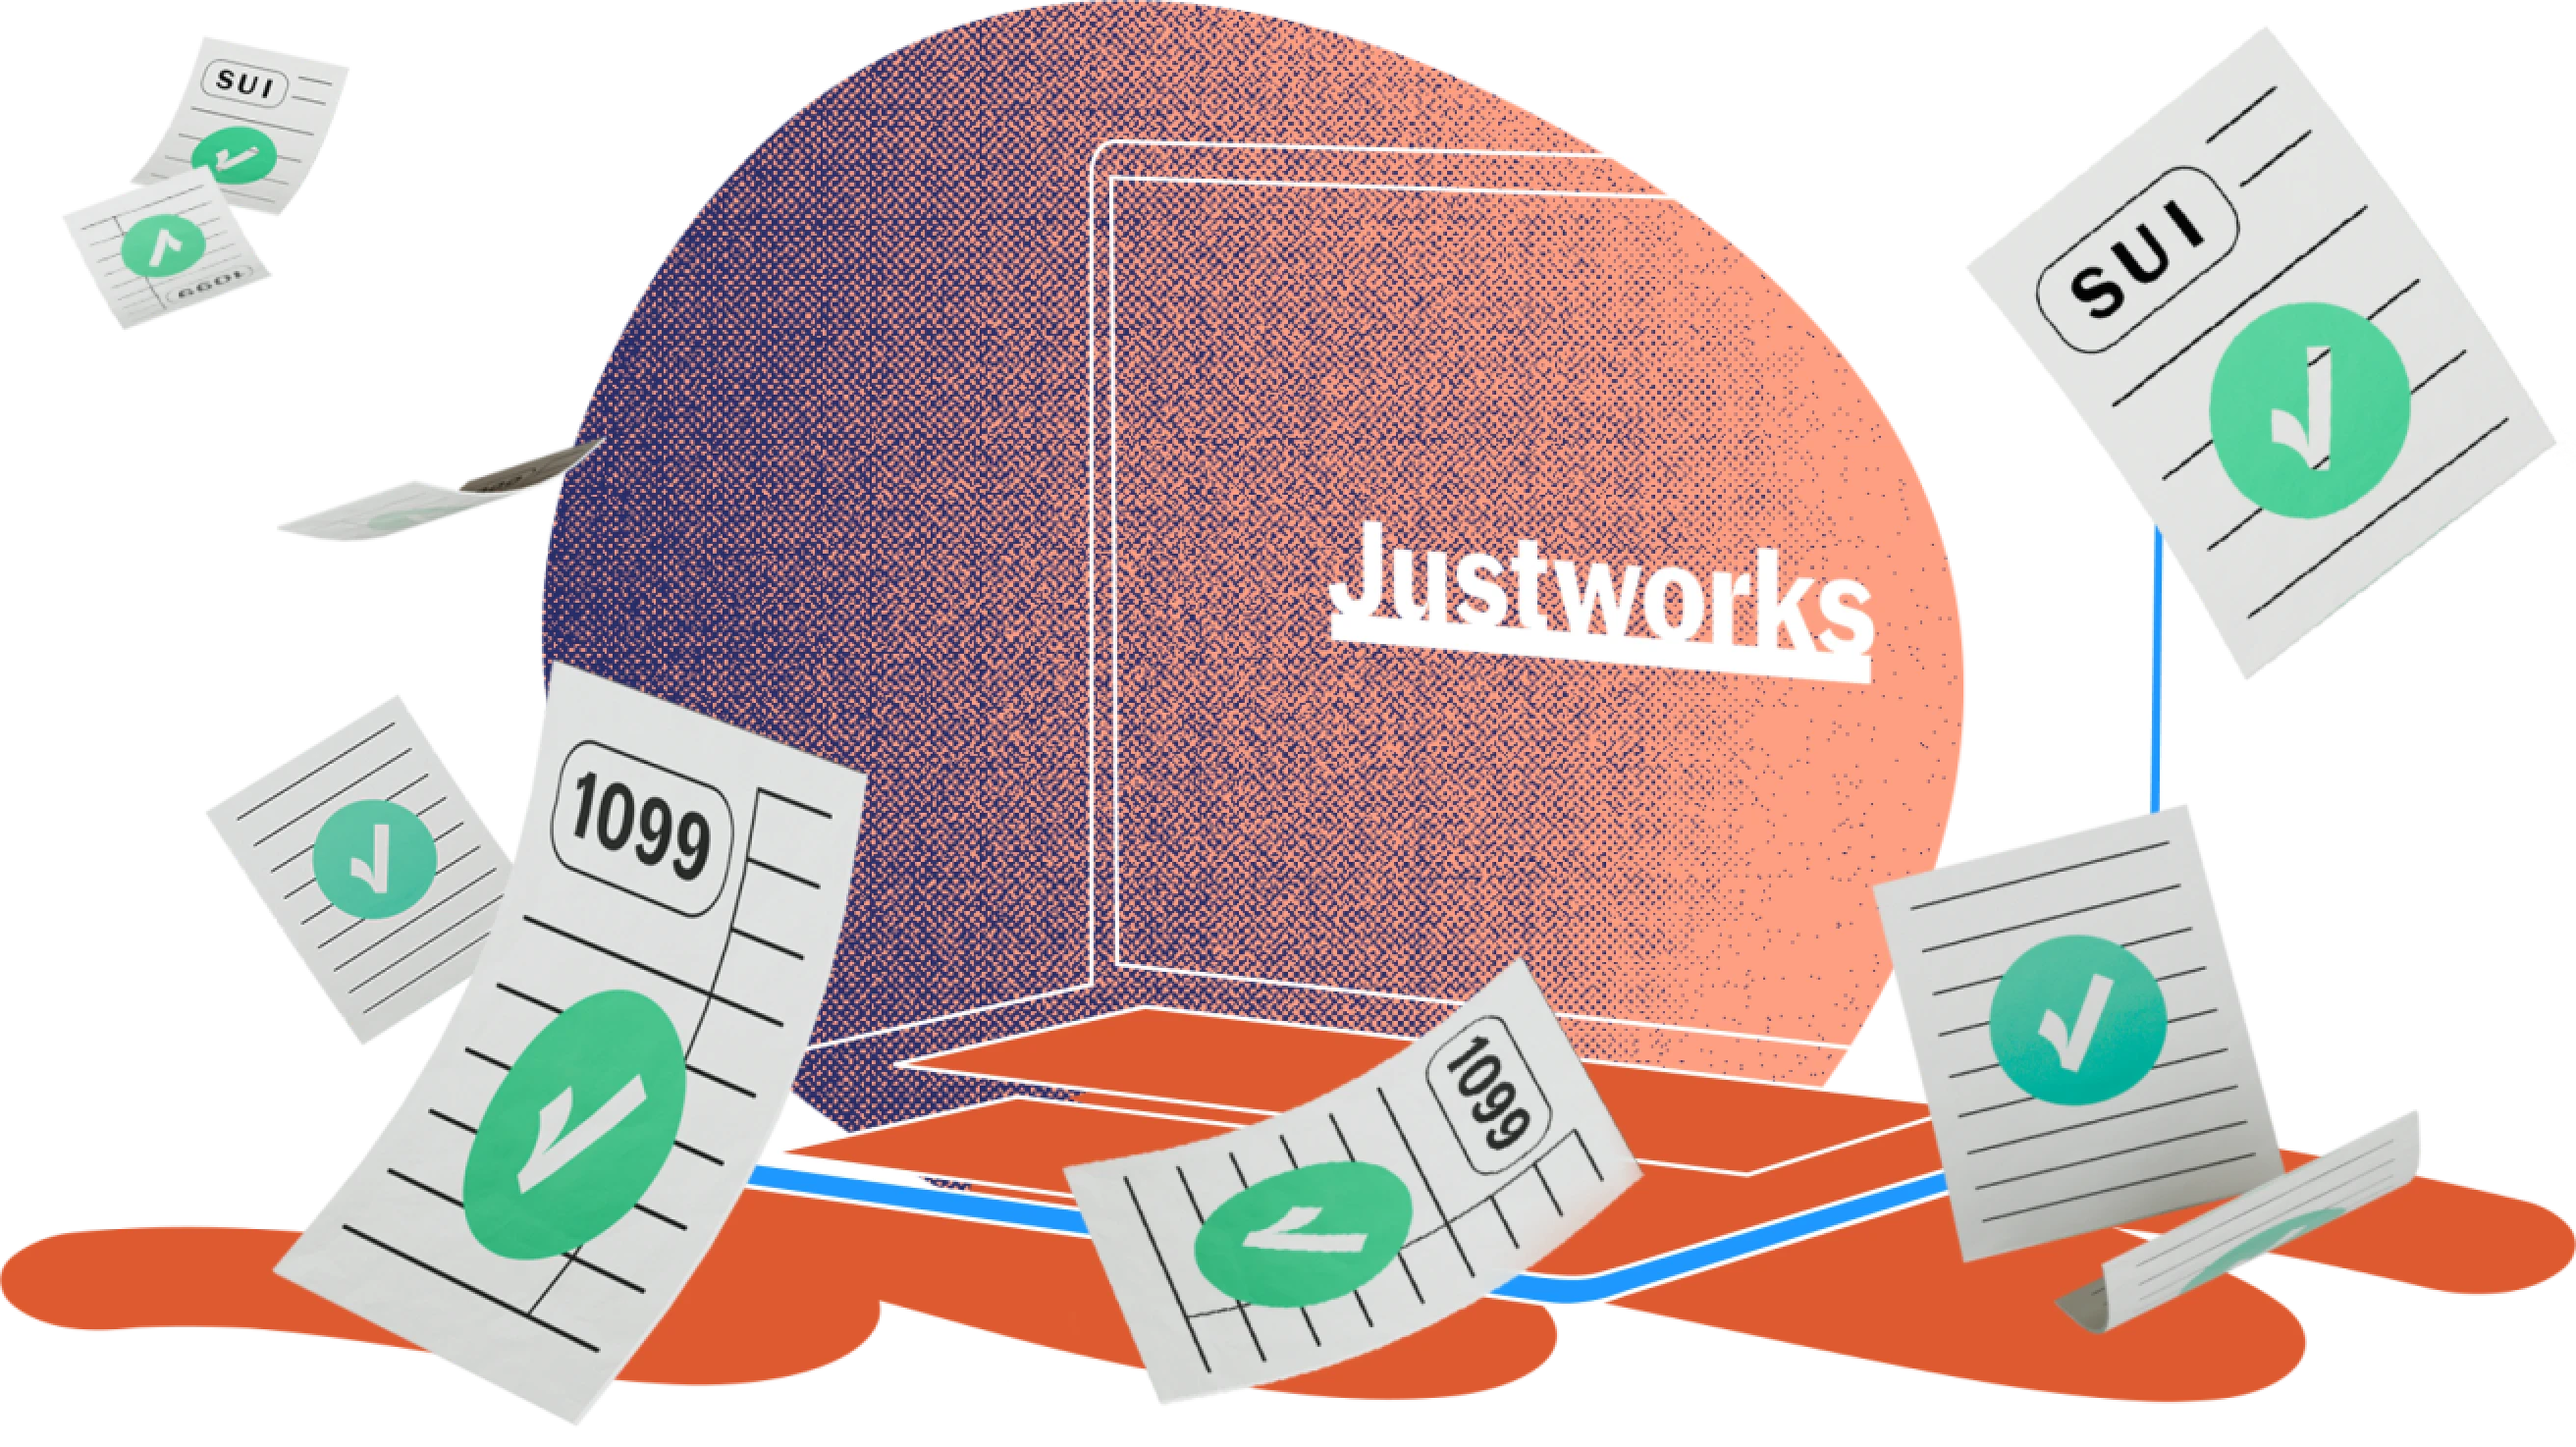  Justworks helps accountants focus on what they do best